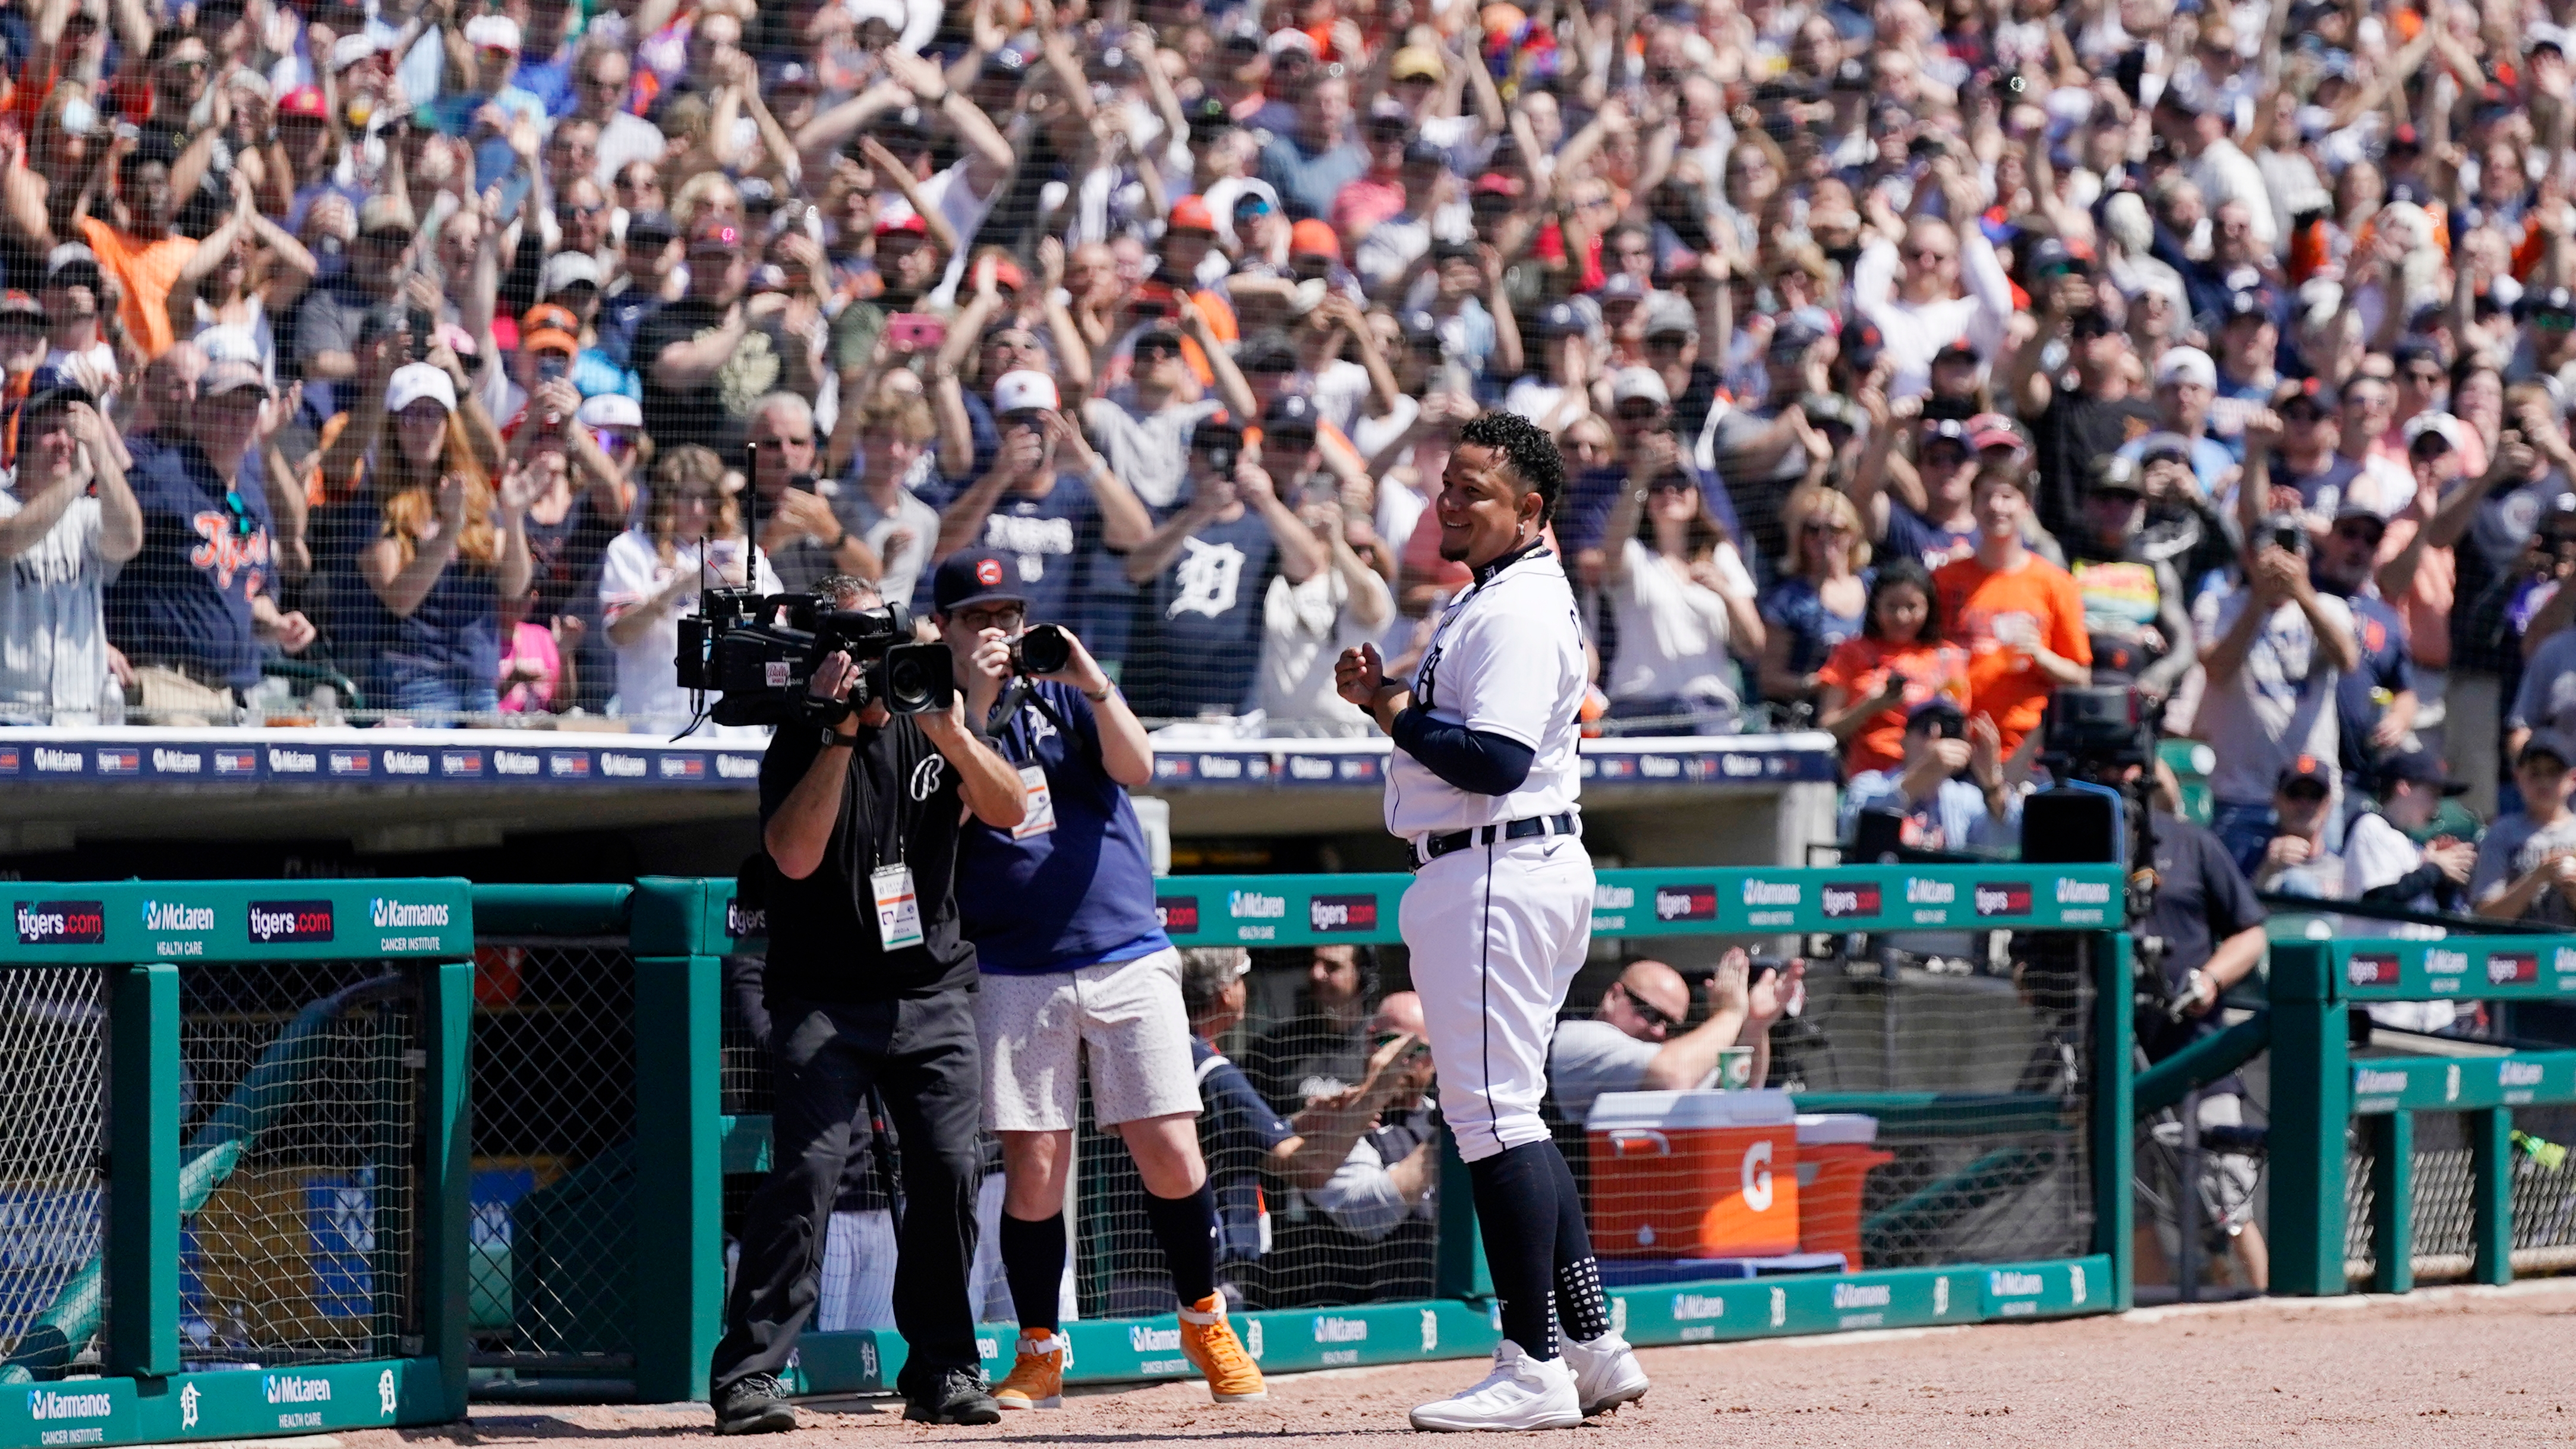 Detroit Tigers on X: The 28th player in MLB history to hit 500 home runs.  Congrats, @MiguelCabrera!  / X